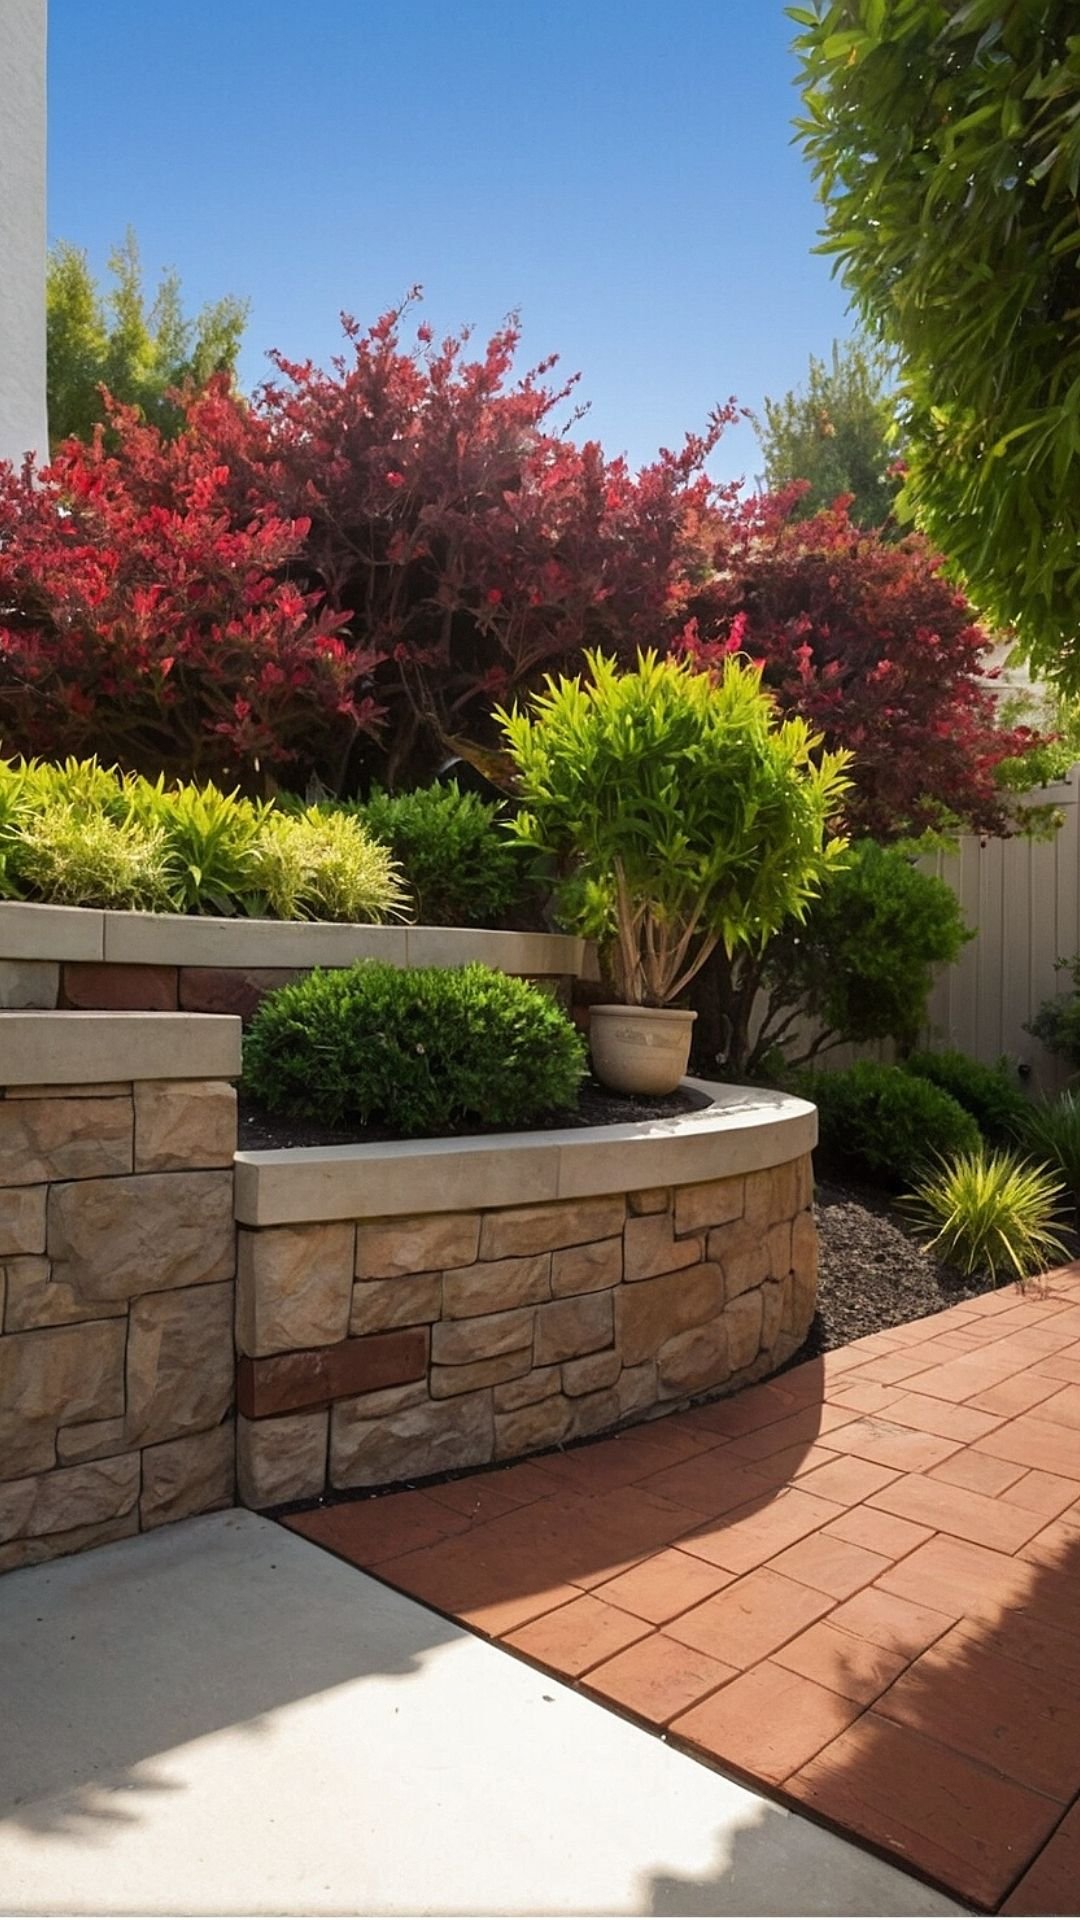 Tiered Garden Beds – Richly Colored Plants and Stone Accents